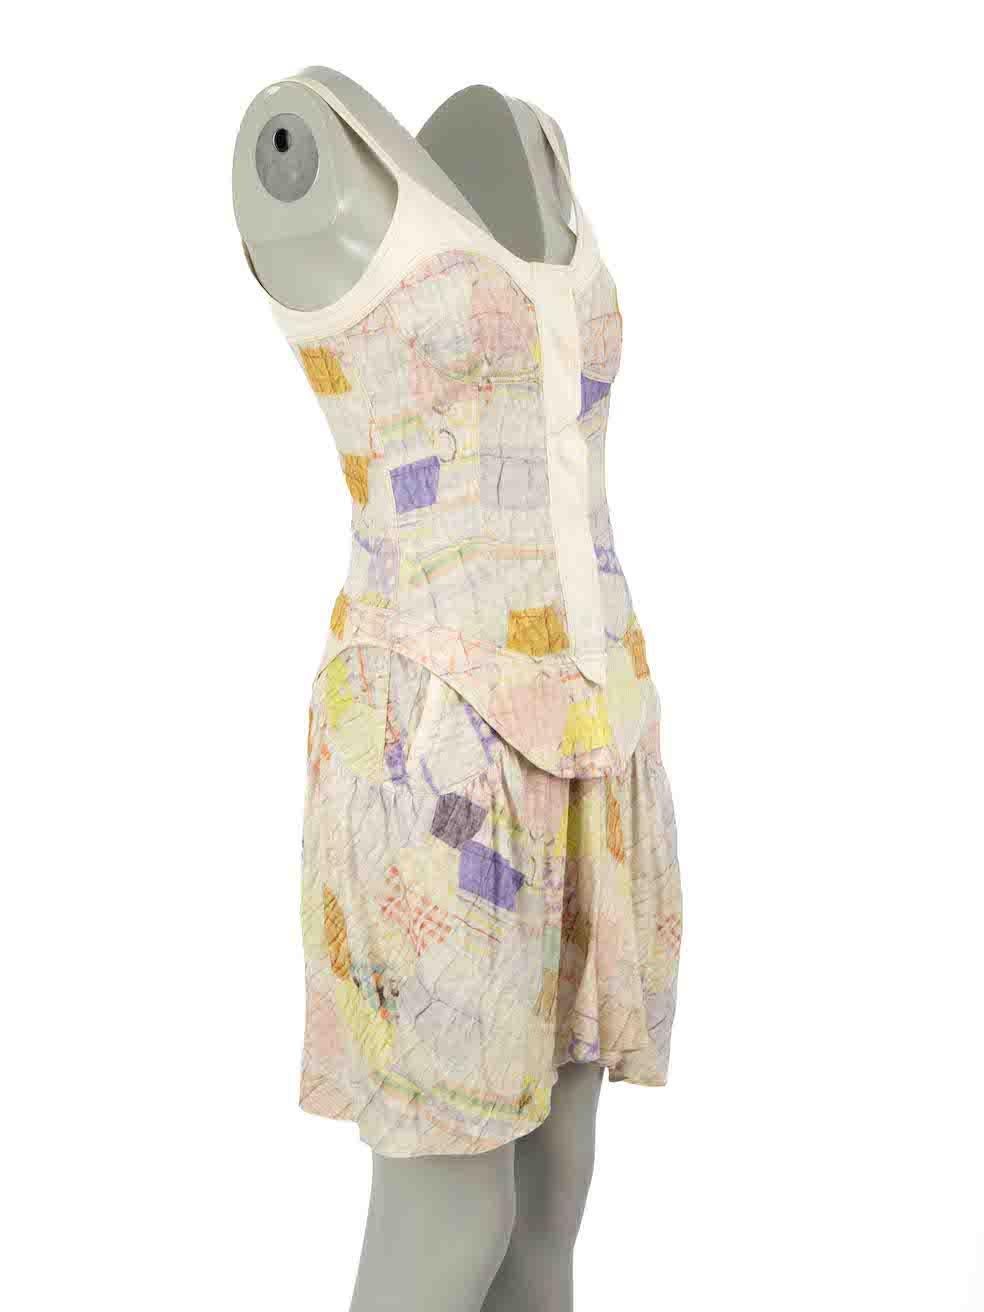 CONDITION is Good. Minor wear to dress is evident. Light pilling to overall fabric and loose stitching waist seam on this used Isabel Marant designer resale item.
 
Details
Multicolour
Linen
Dress
Patchwork pattern
Sleeveless
V-neck
Snap button